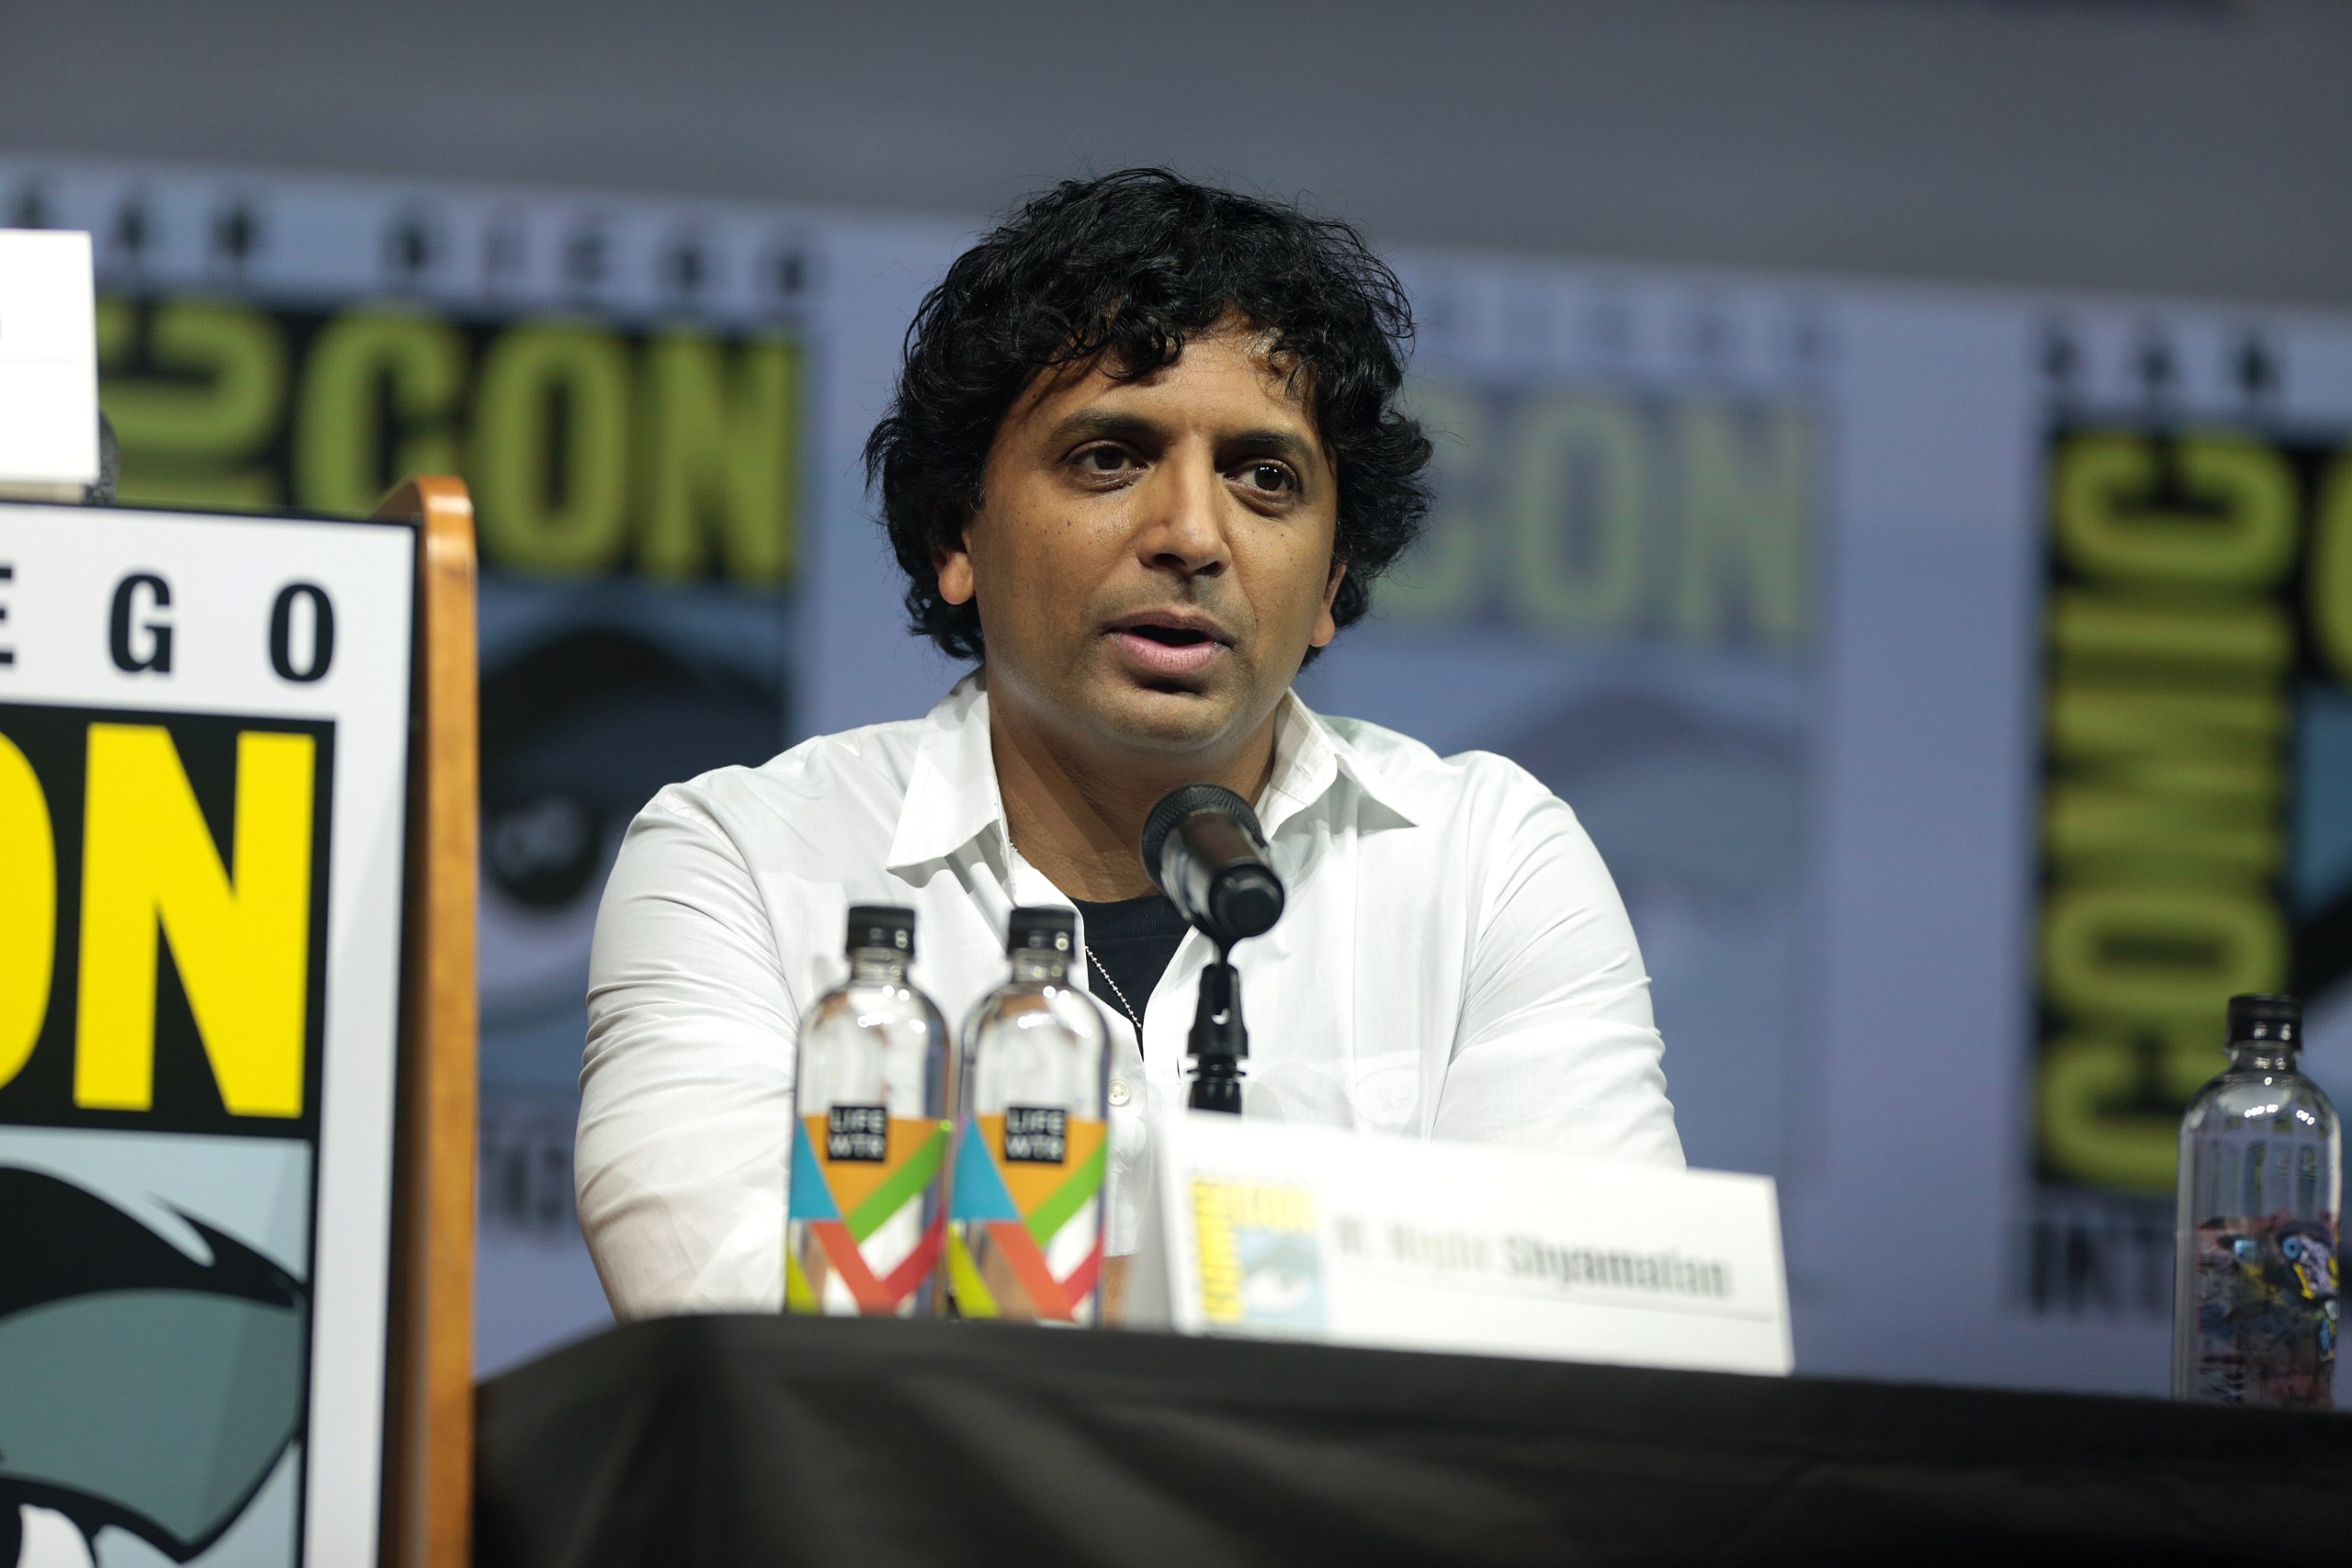 M. Night Shyamalan’s Next Three Films Are Not Connected